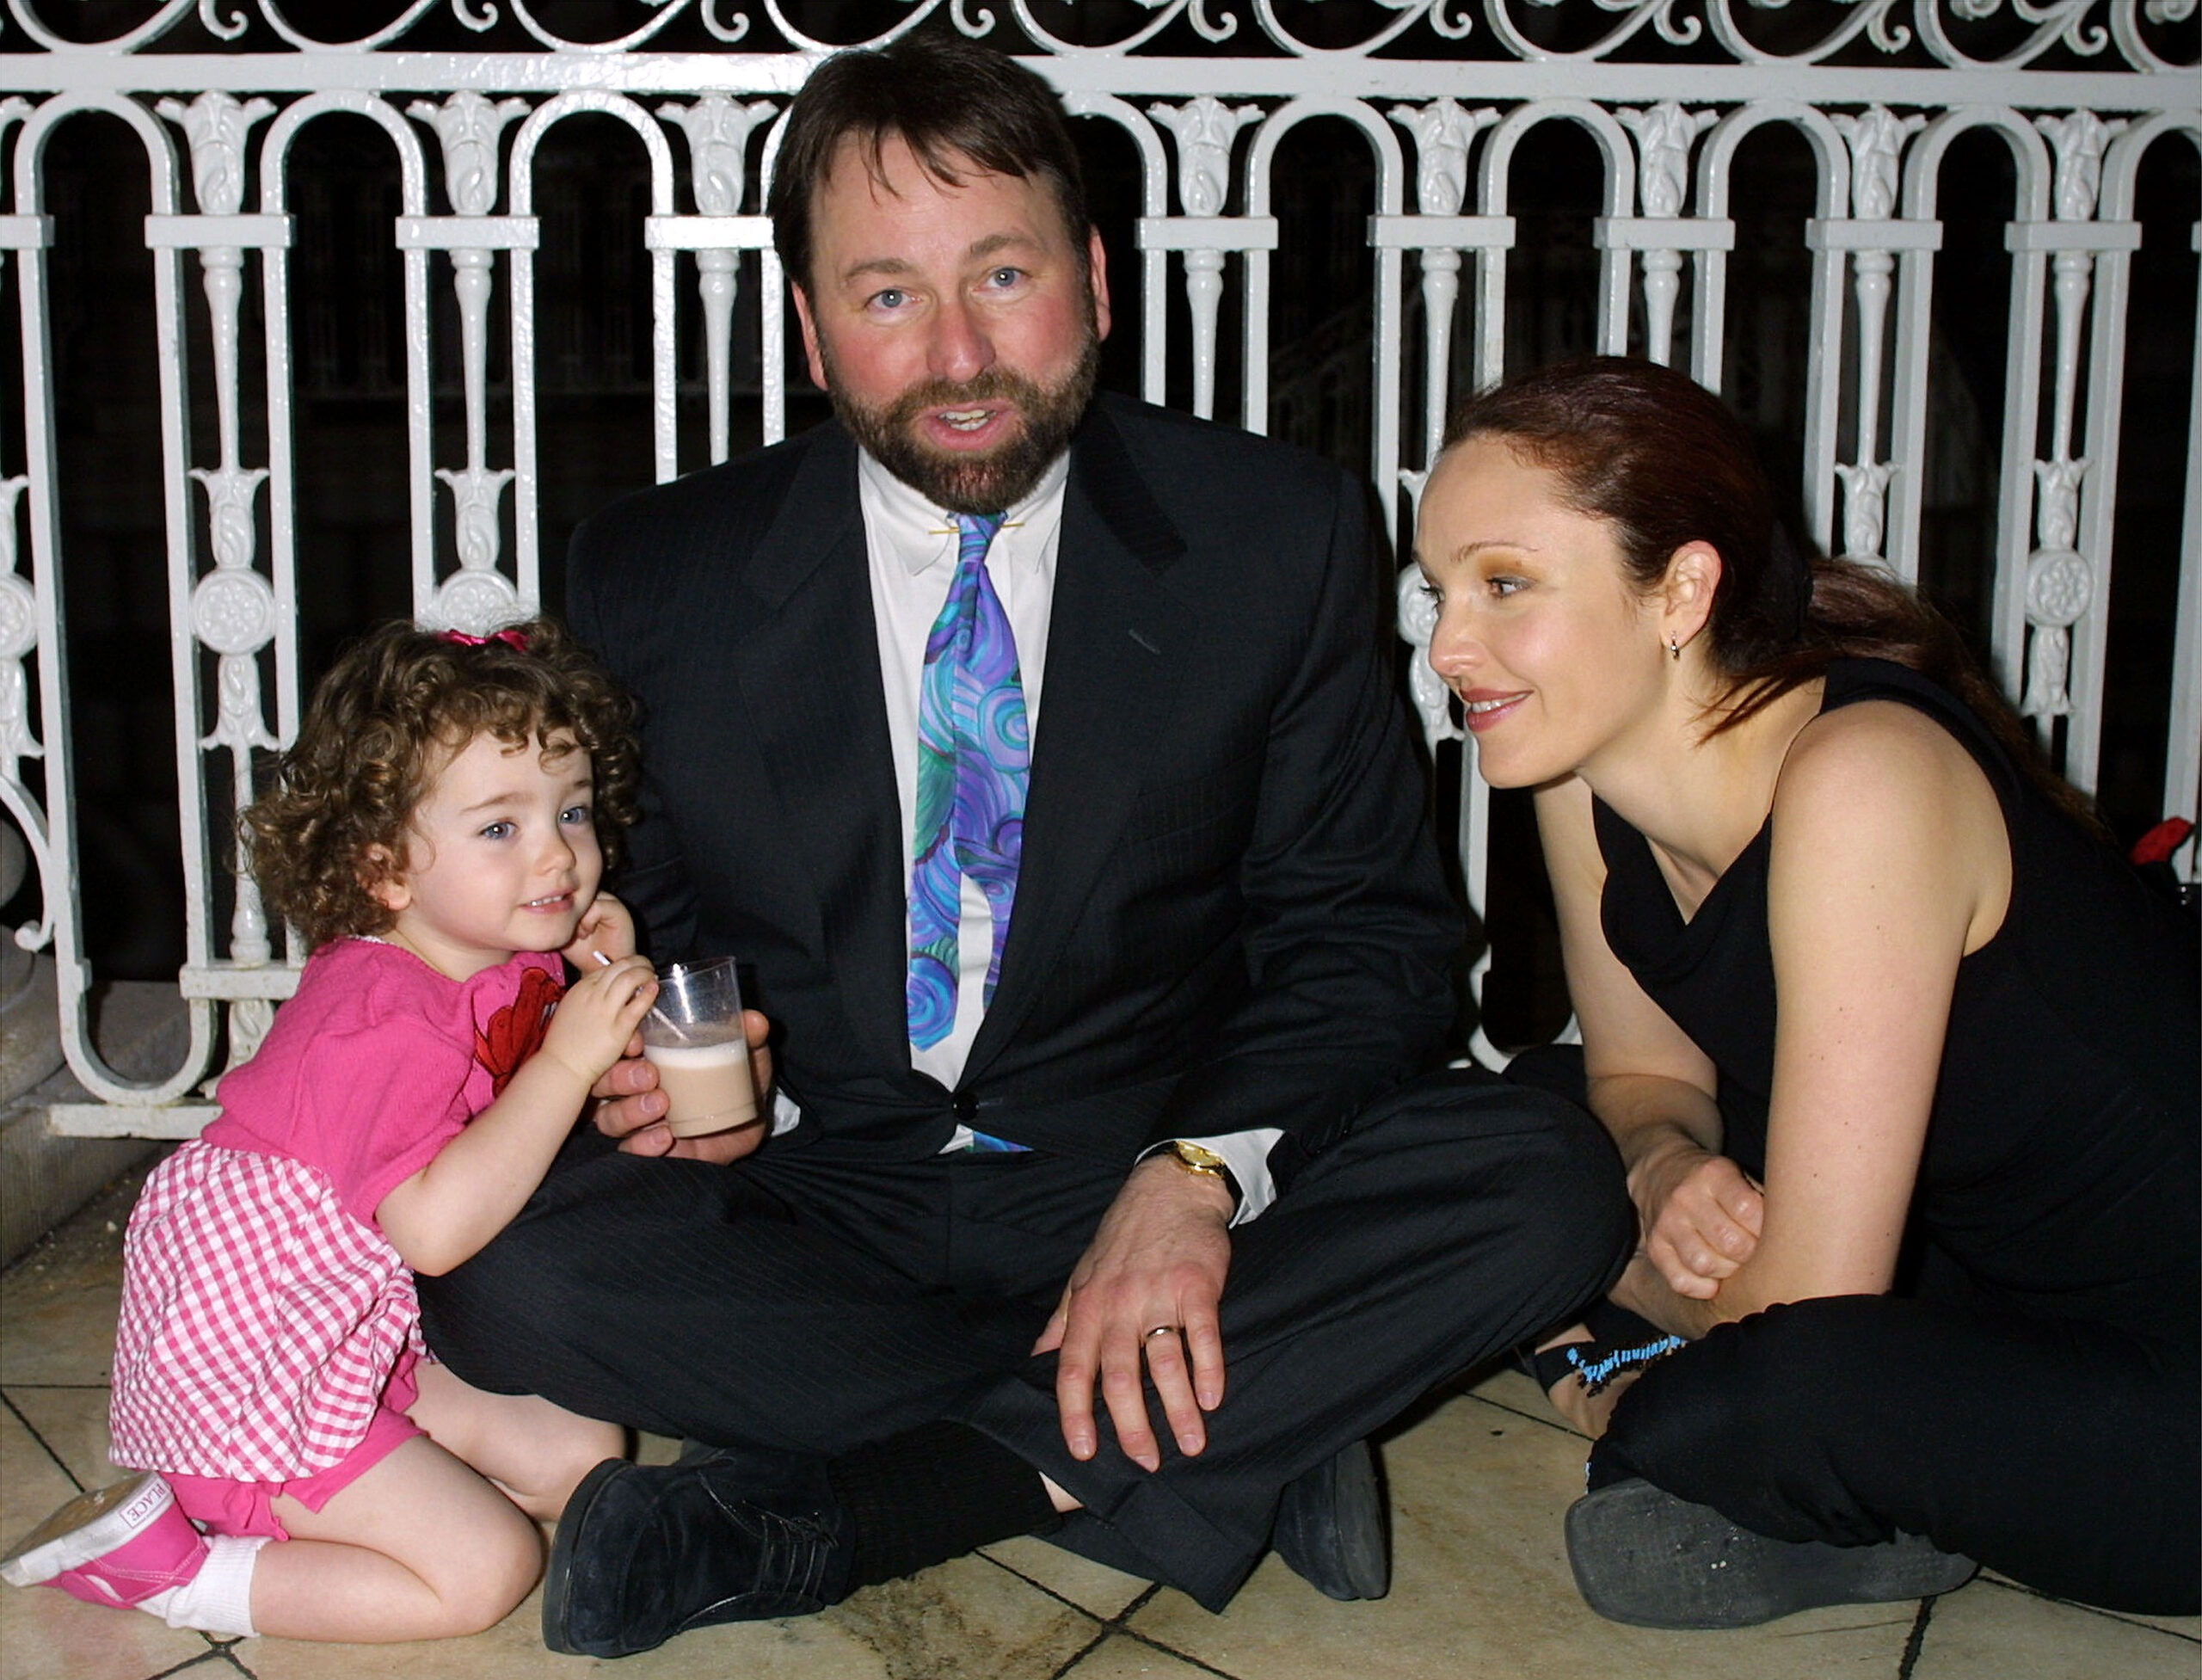 Stella Ritter, John Ritter, and Amy Yasbeck at the Daytime Emmy Awards in New York City on May 1, 2001 | Source: Getty Images